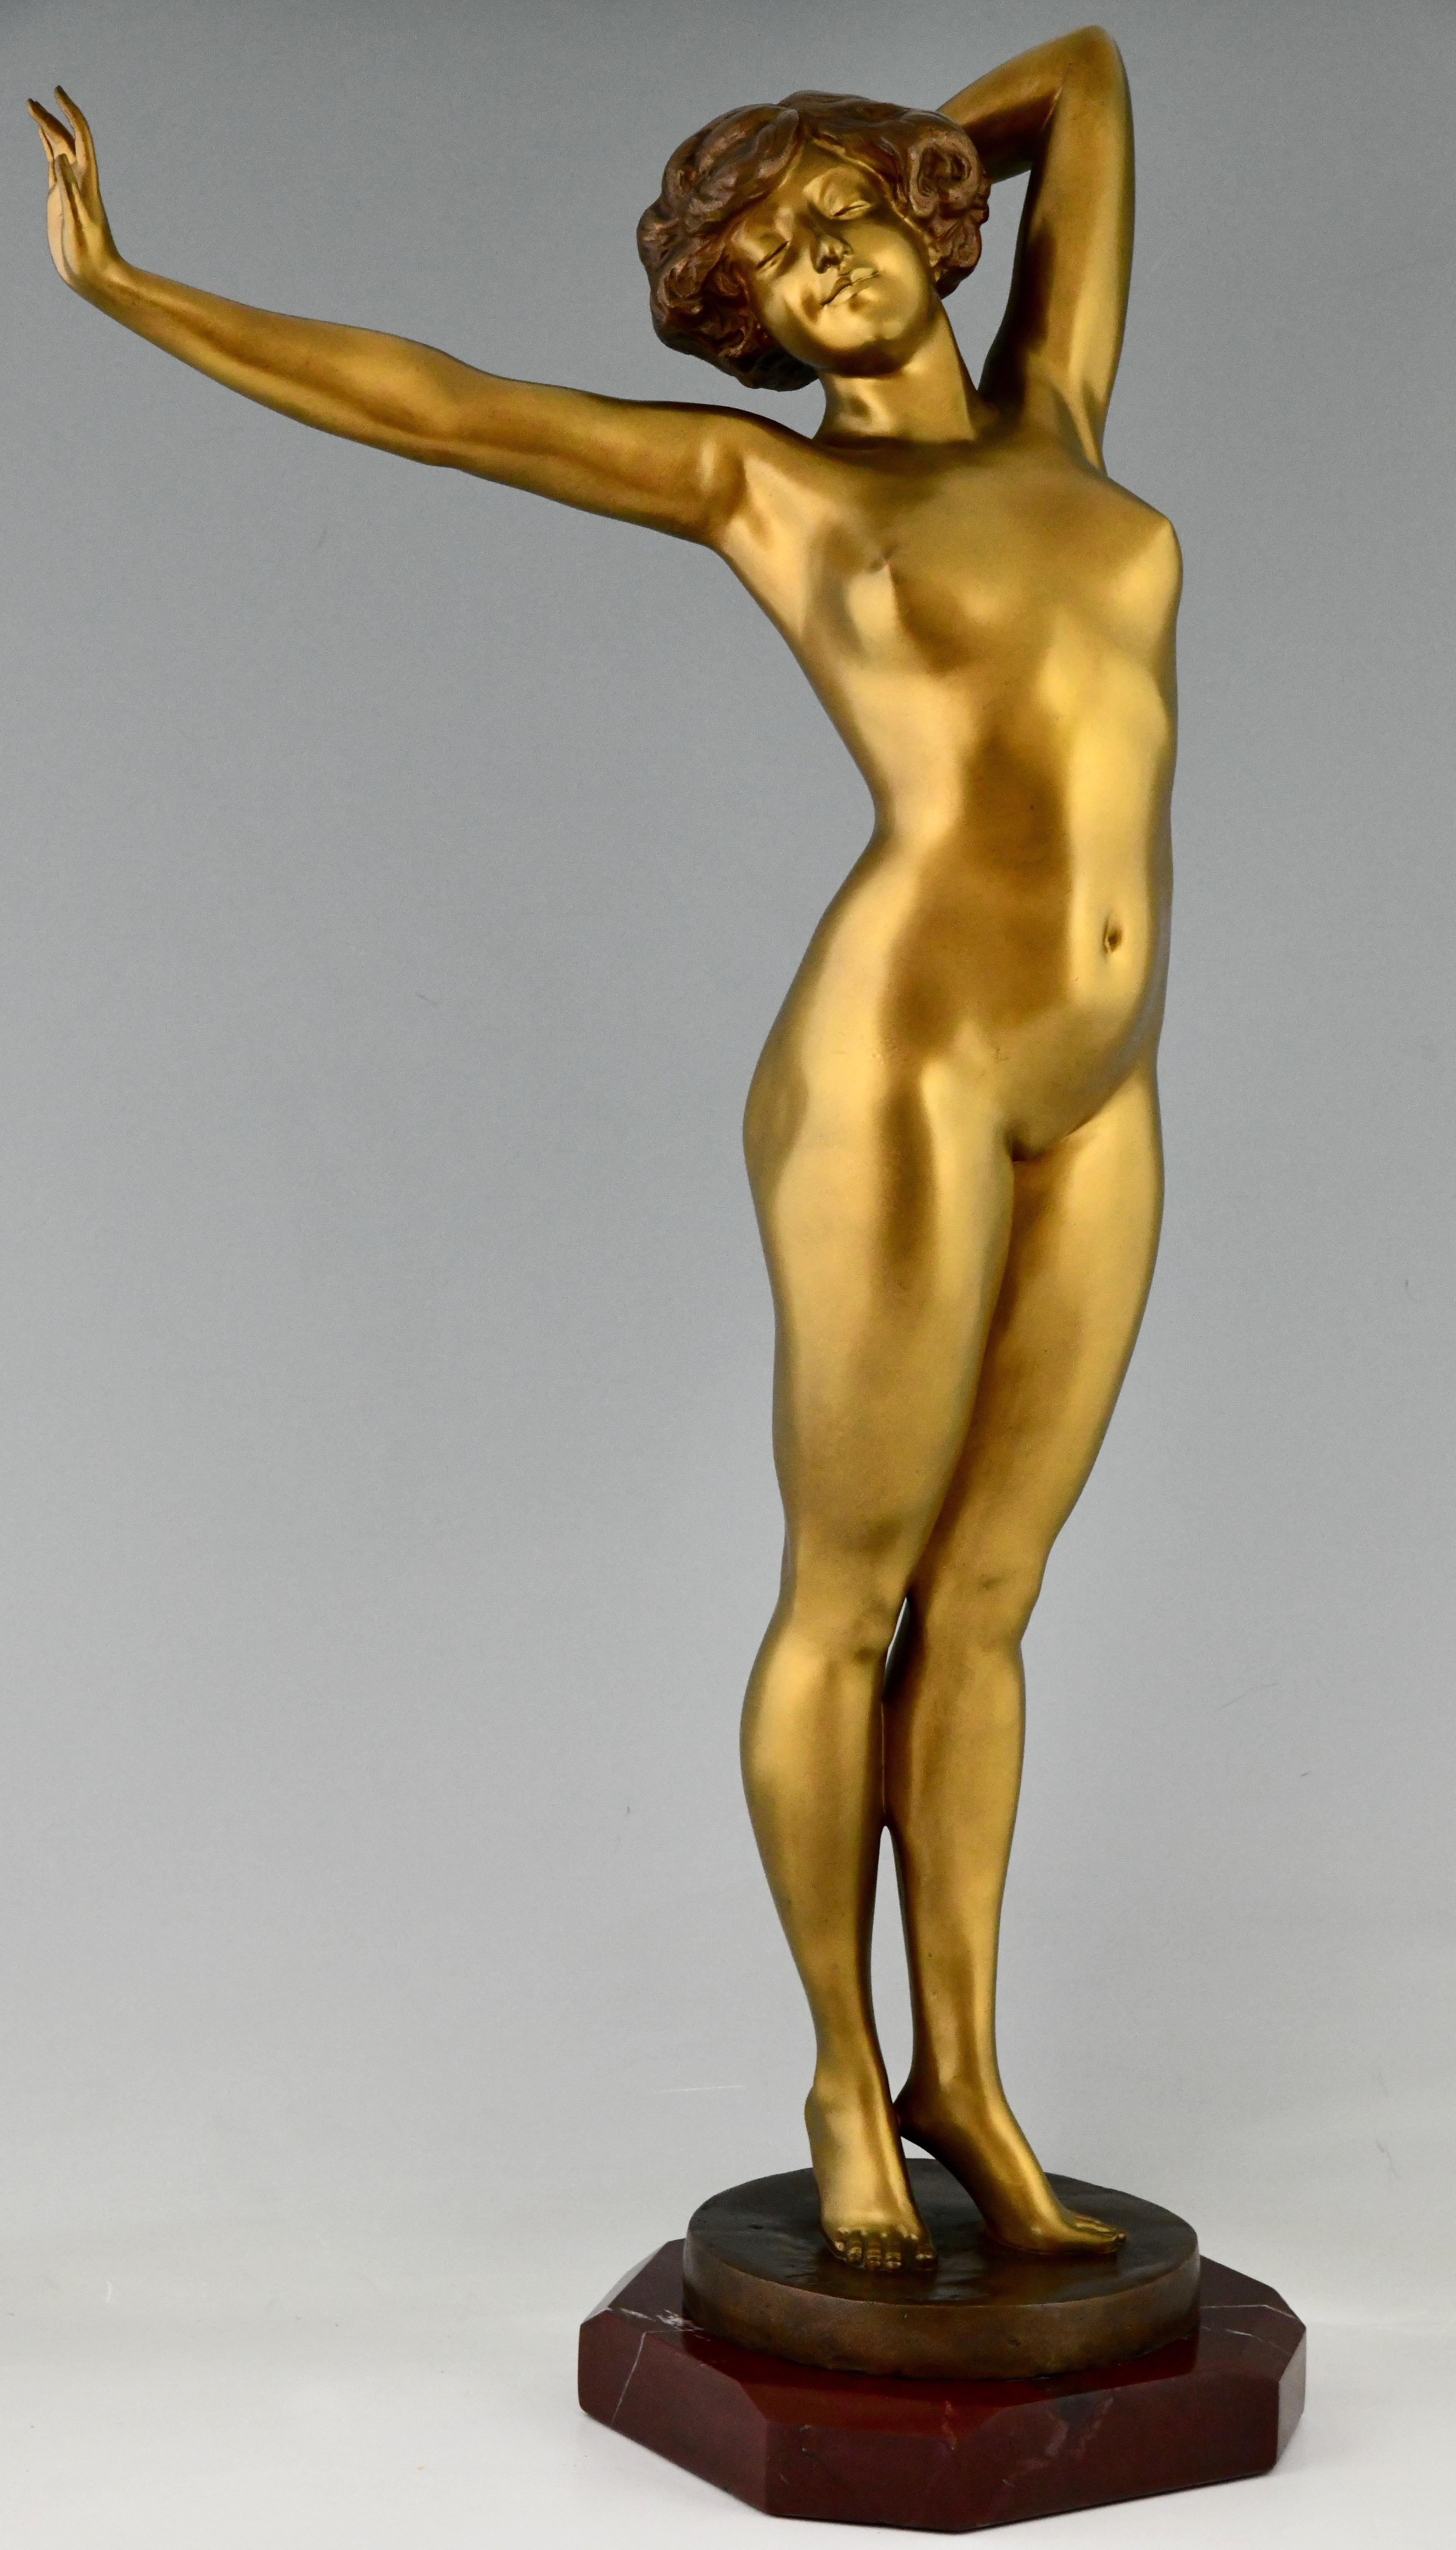 Awakening Art Deco bronze sculpture nude, young woman streching signed by Paul Philippe. 80 cm or 32 inch tall bronze on Belgian red marble base. 
Also called Le Reveil, France 1920. 

Impressive size.

This sculpture is illustrated in: Art